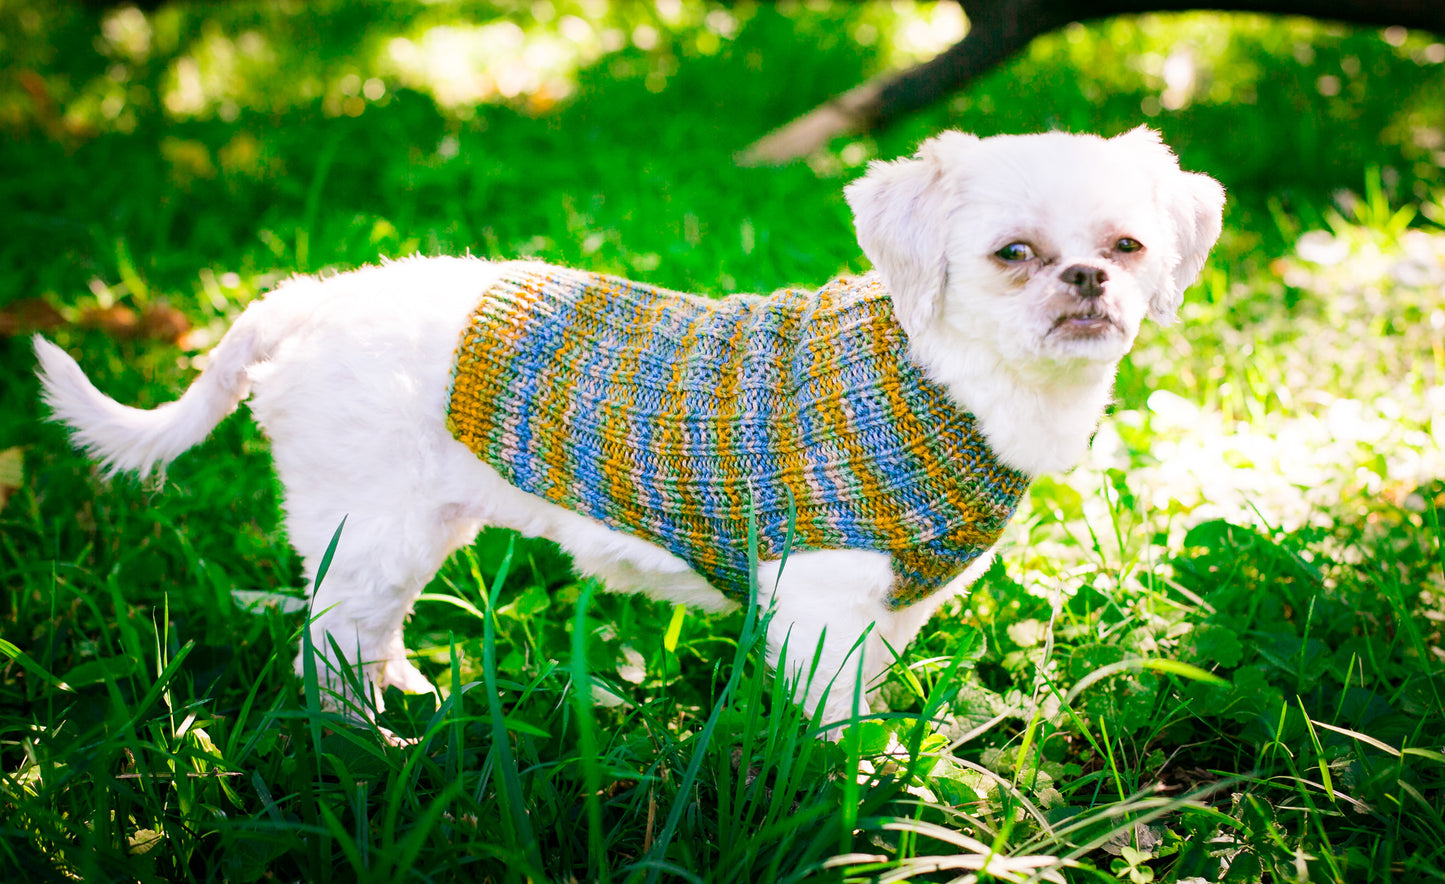 Cat & Dog Pet Sweaters in Lake Bluff - VERY LIMITED QUANTITY AND LAST OF THIS COLORWAY!